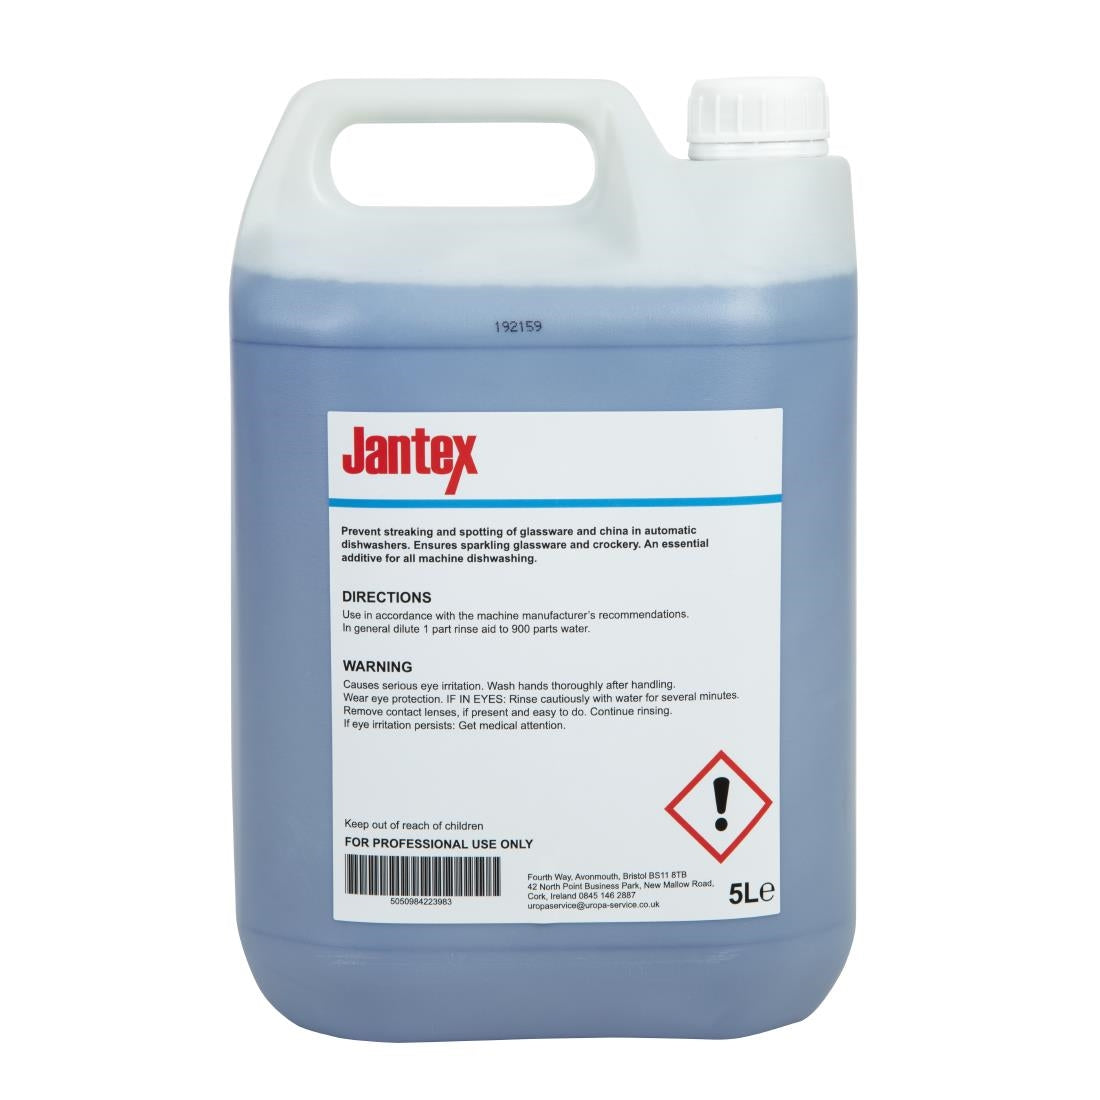 Jantex Dishwasher Rinse Aid Concentrate 5Ltr JD Catering Equipment Solutions Ltd